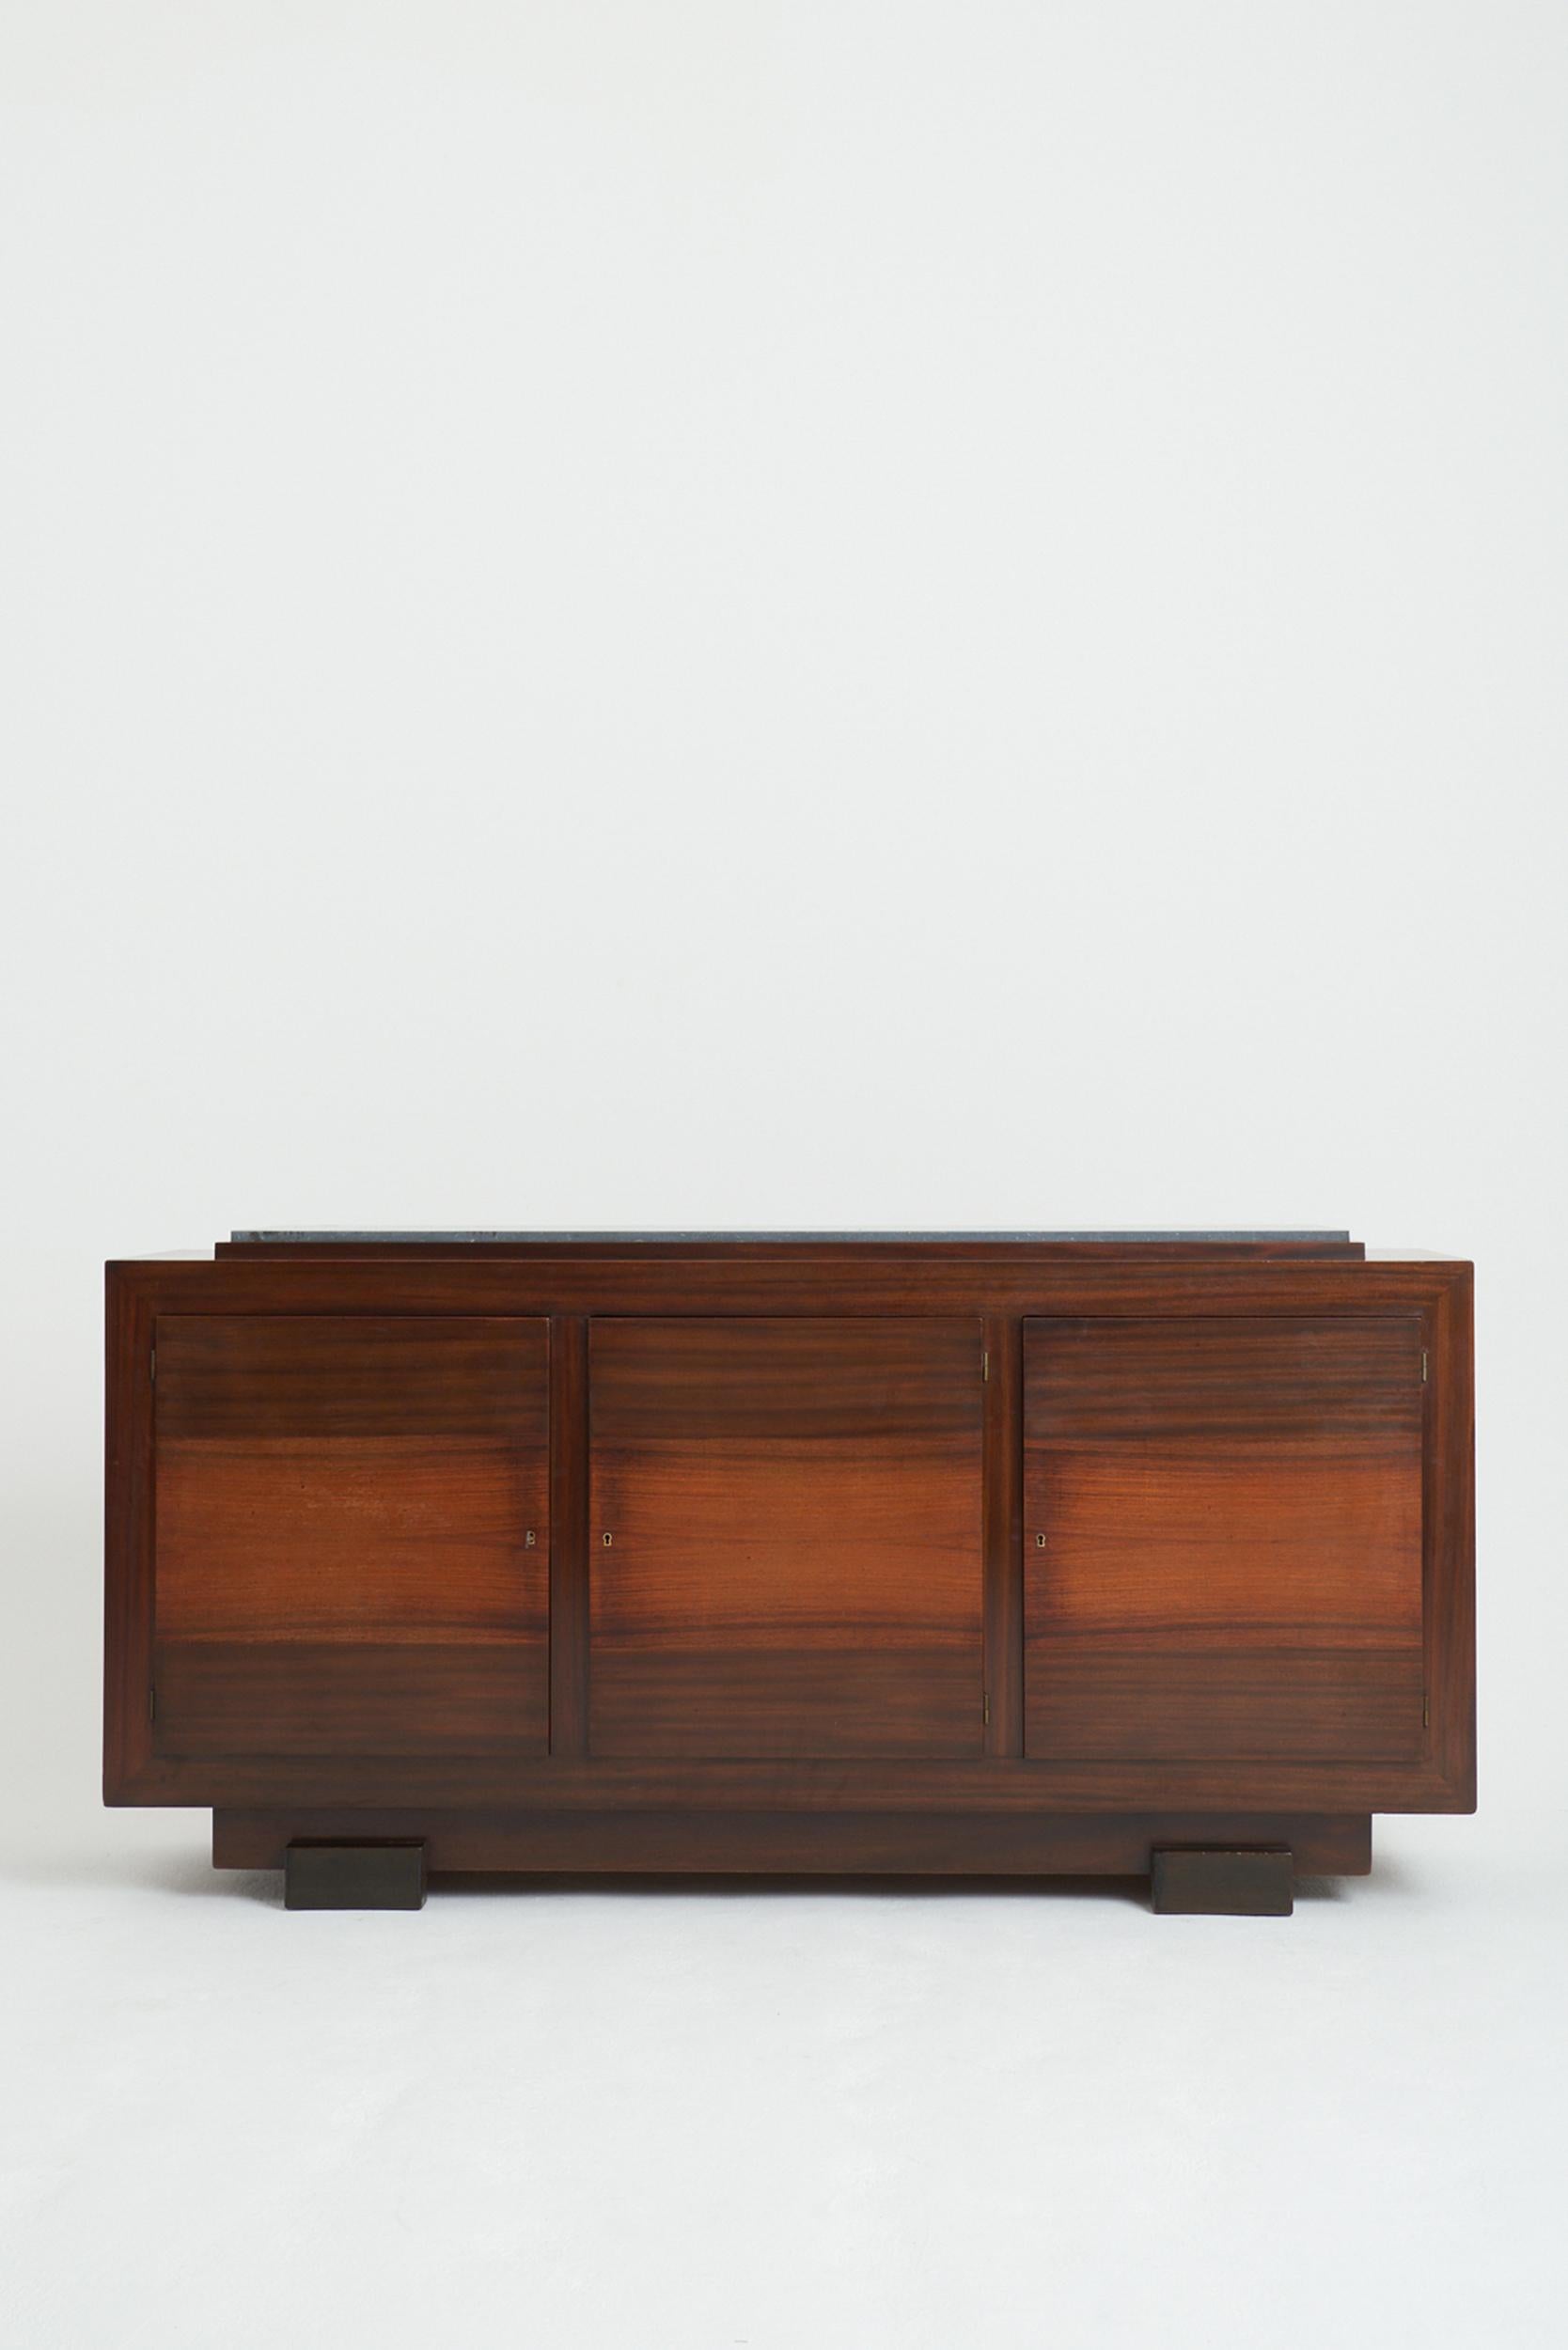 An Art Deco mahogany and black stone top three-door sideboard.
France, Circa 1930
99 cm high by 200 cm wide by 50 cm depth